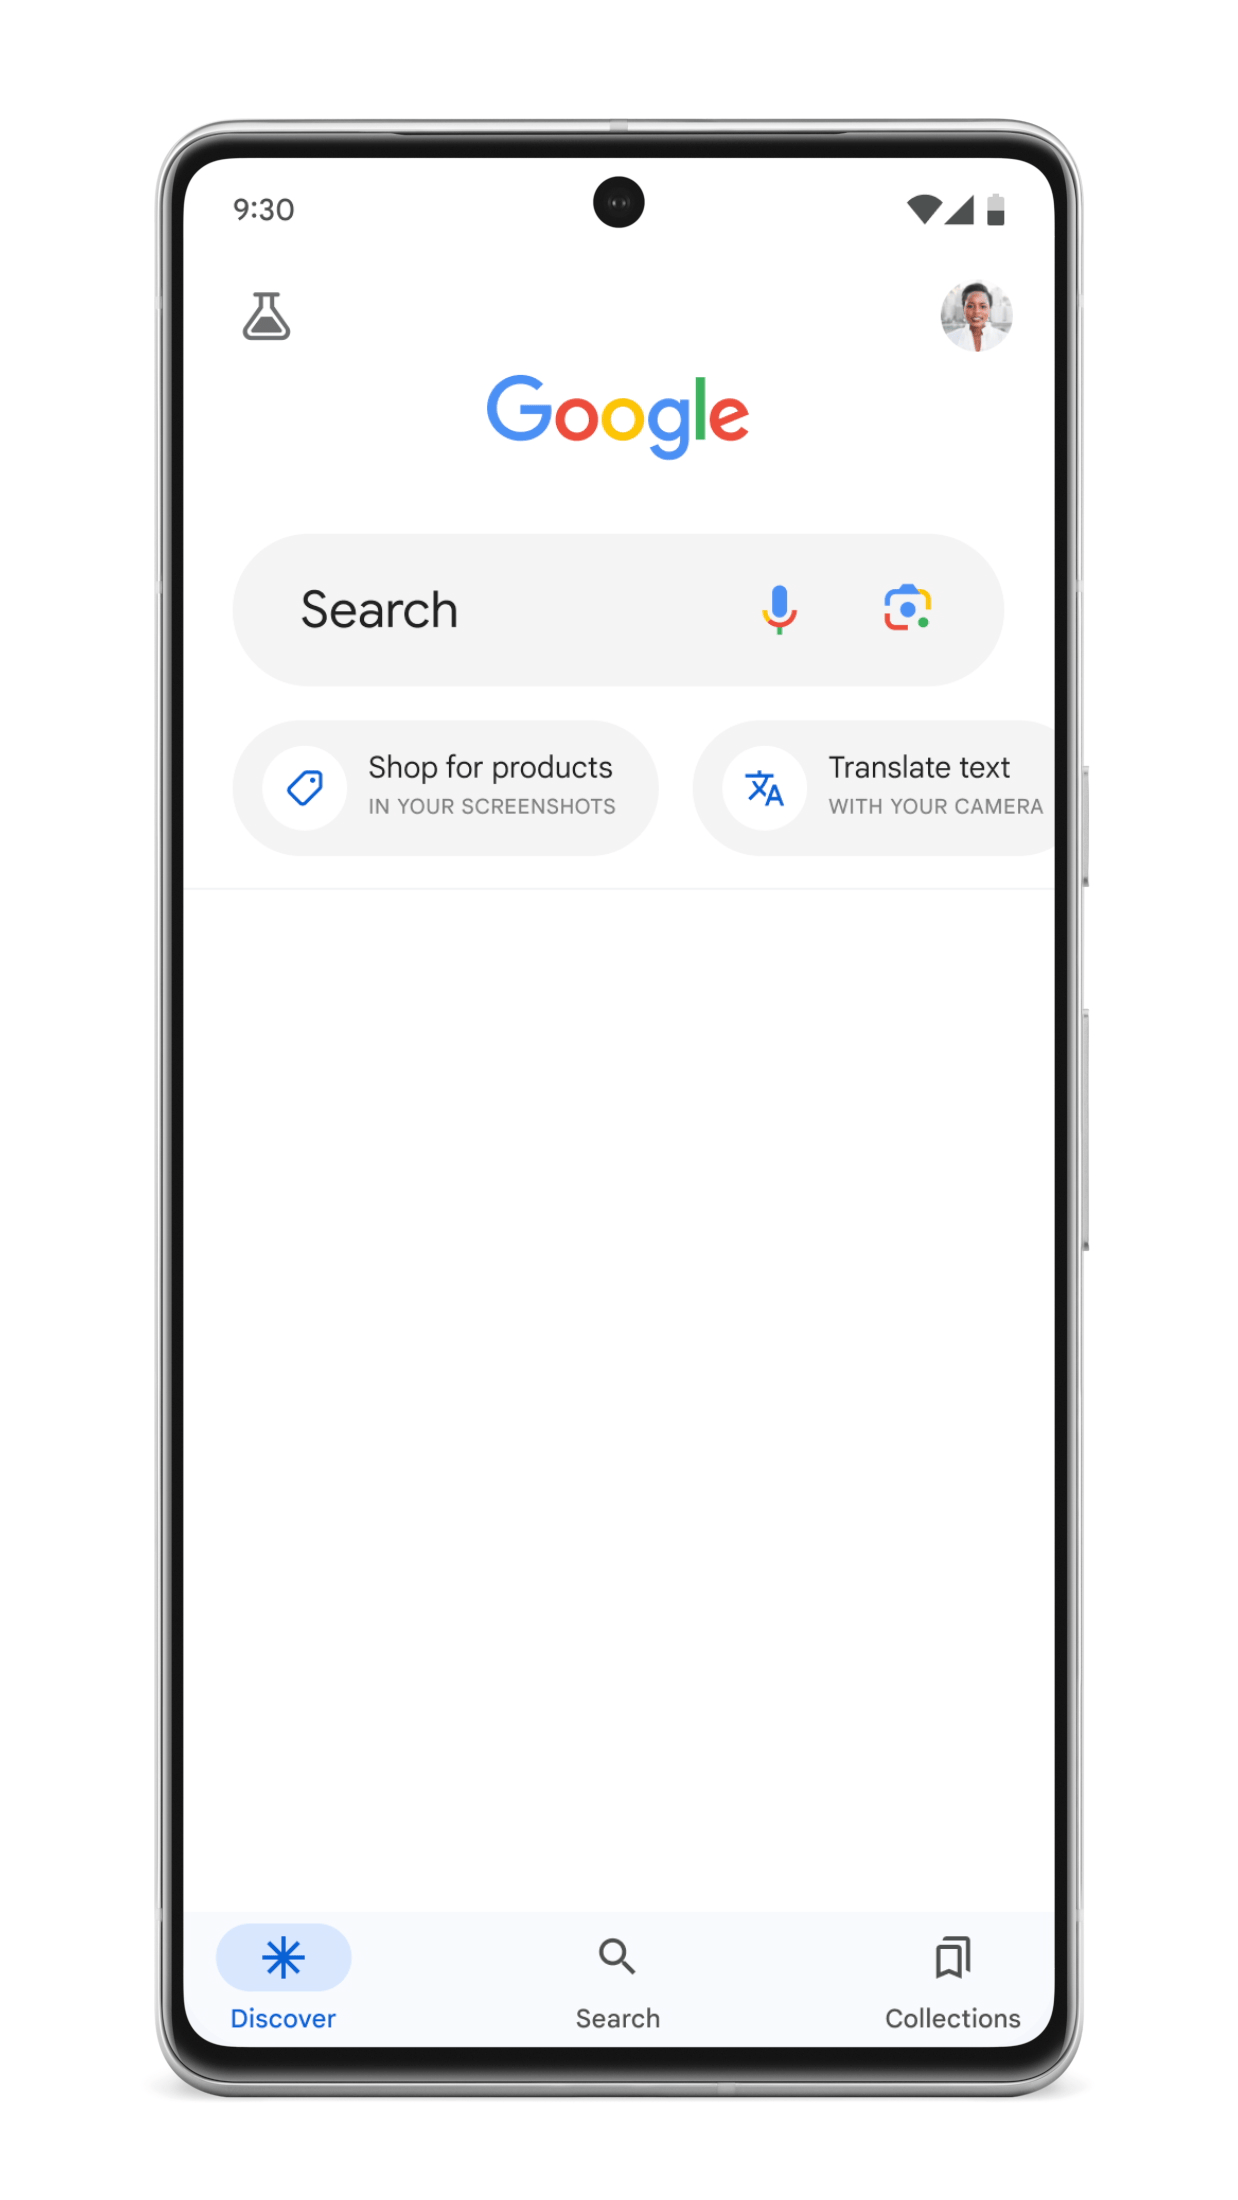 Animated GIF of a smartphone displaying the Google search homepage with options to shop for products, translate text with the camera, and tabs for Discover, Search, and Collections at the bottom.